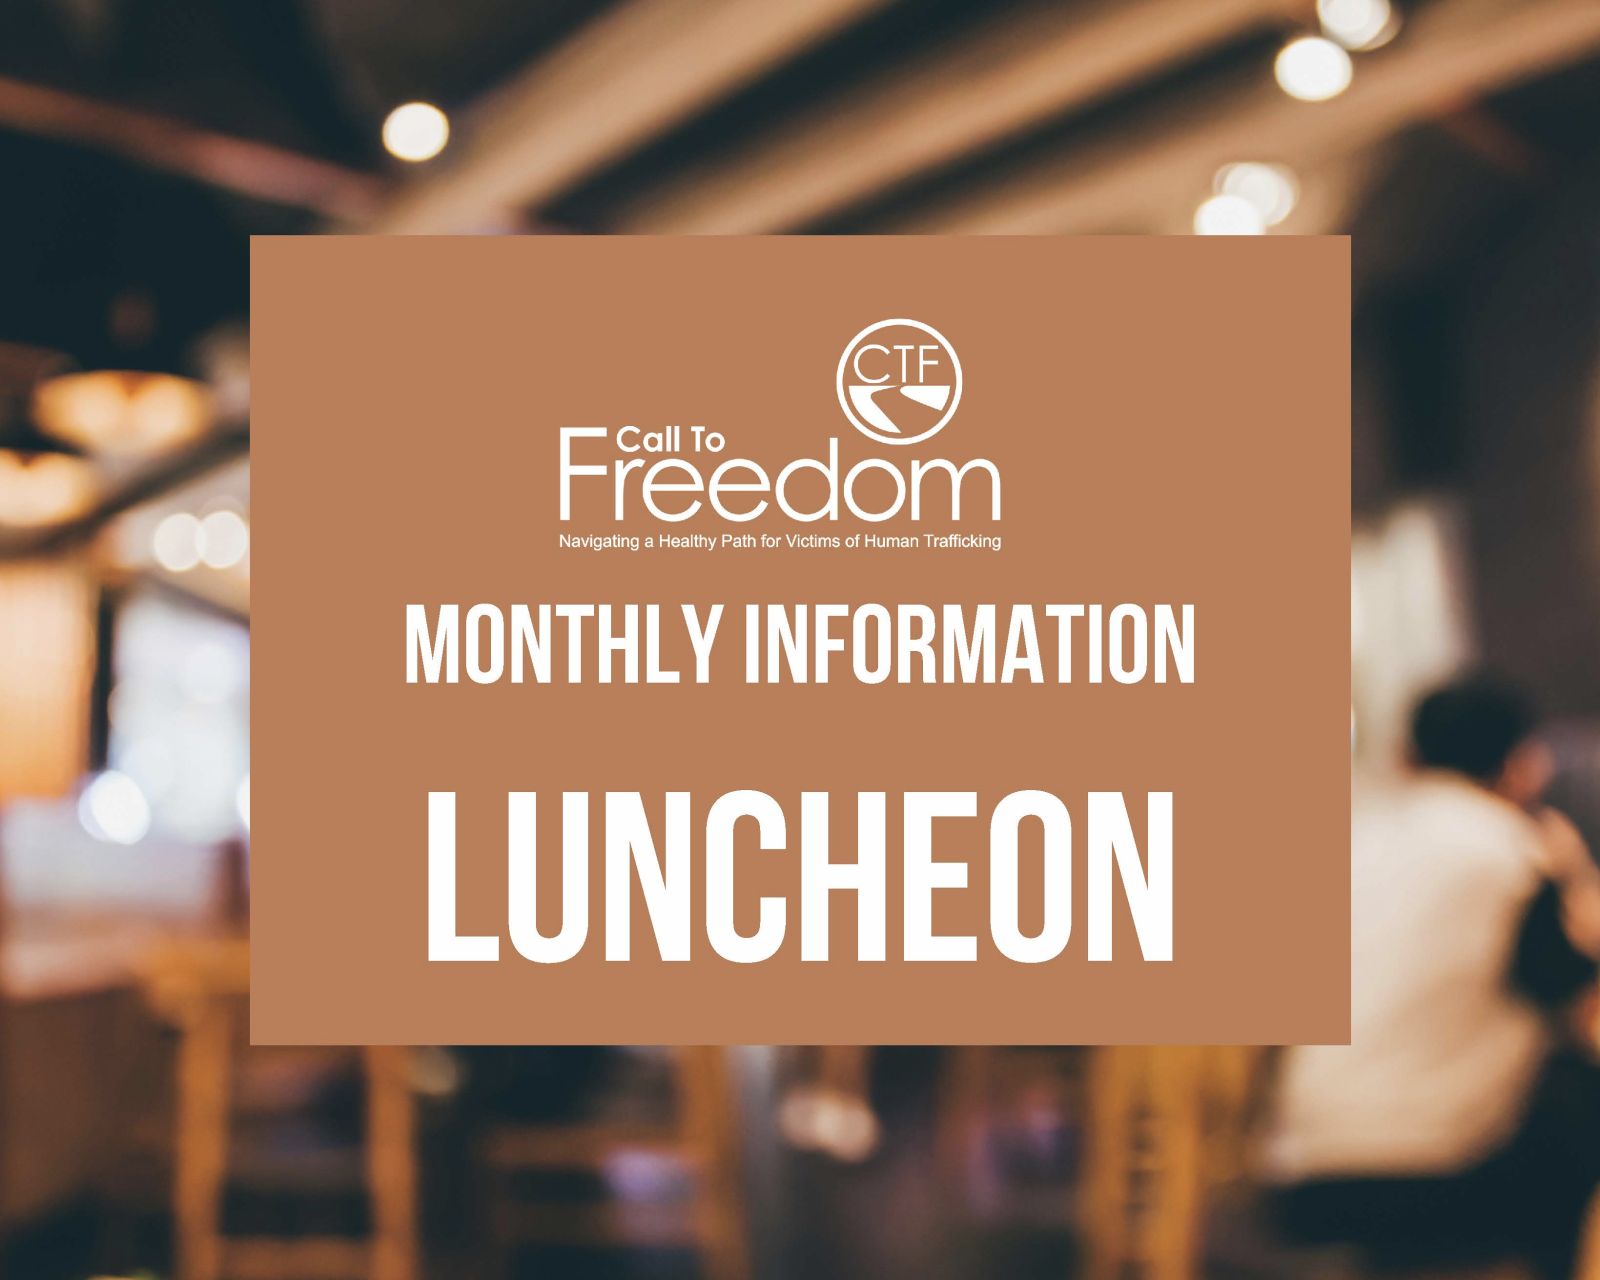 CALL%20TO%20FREEDOM%20Monthly%20Information%20LUNCHEON%20Image.jpg